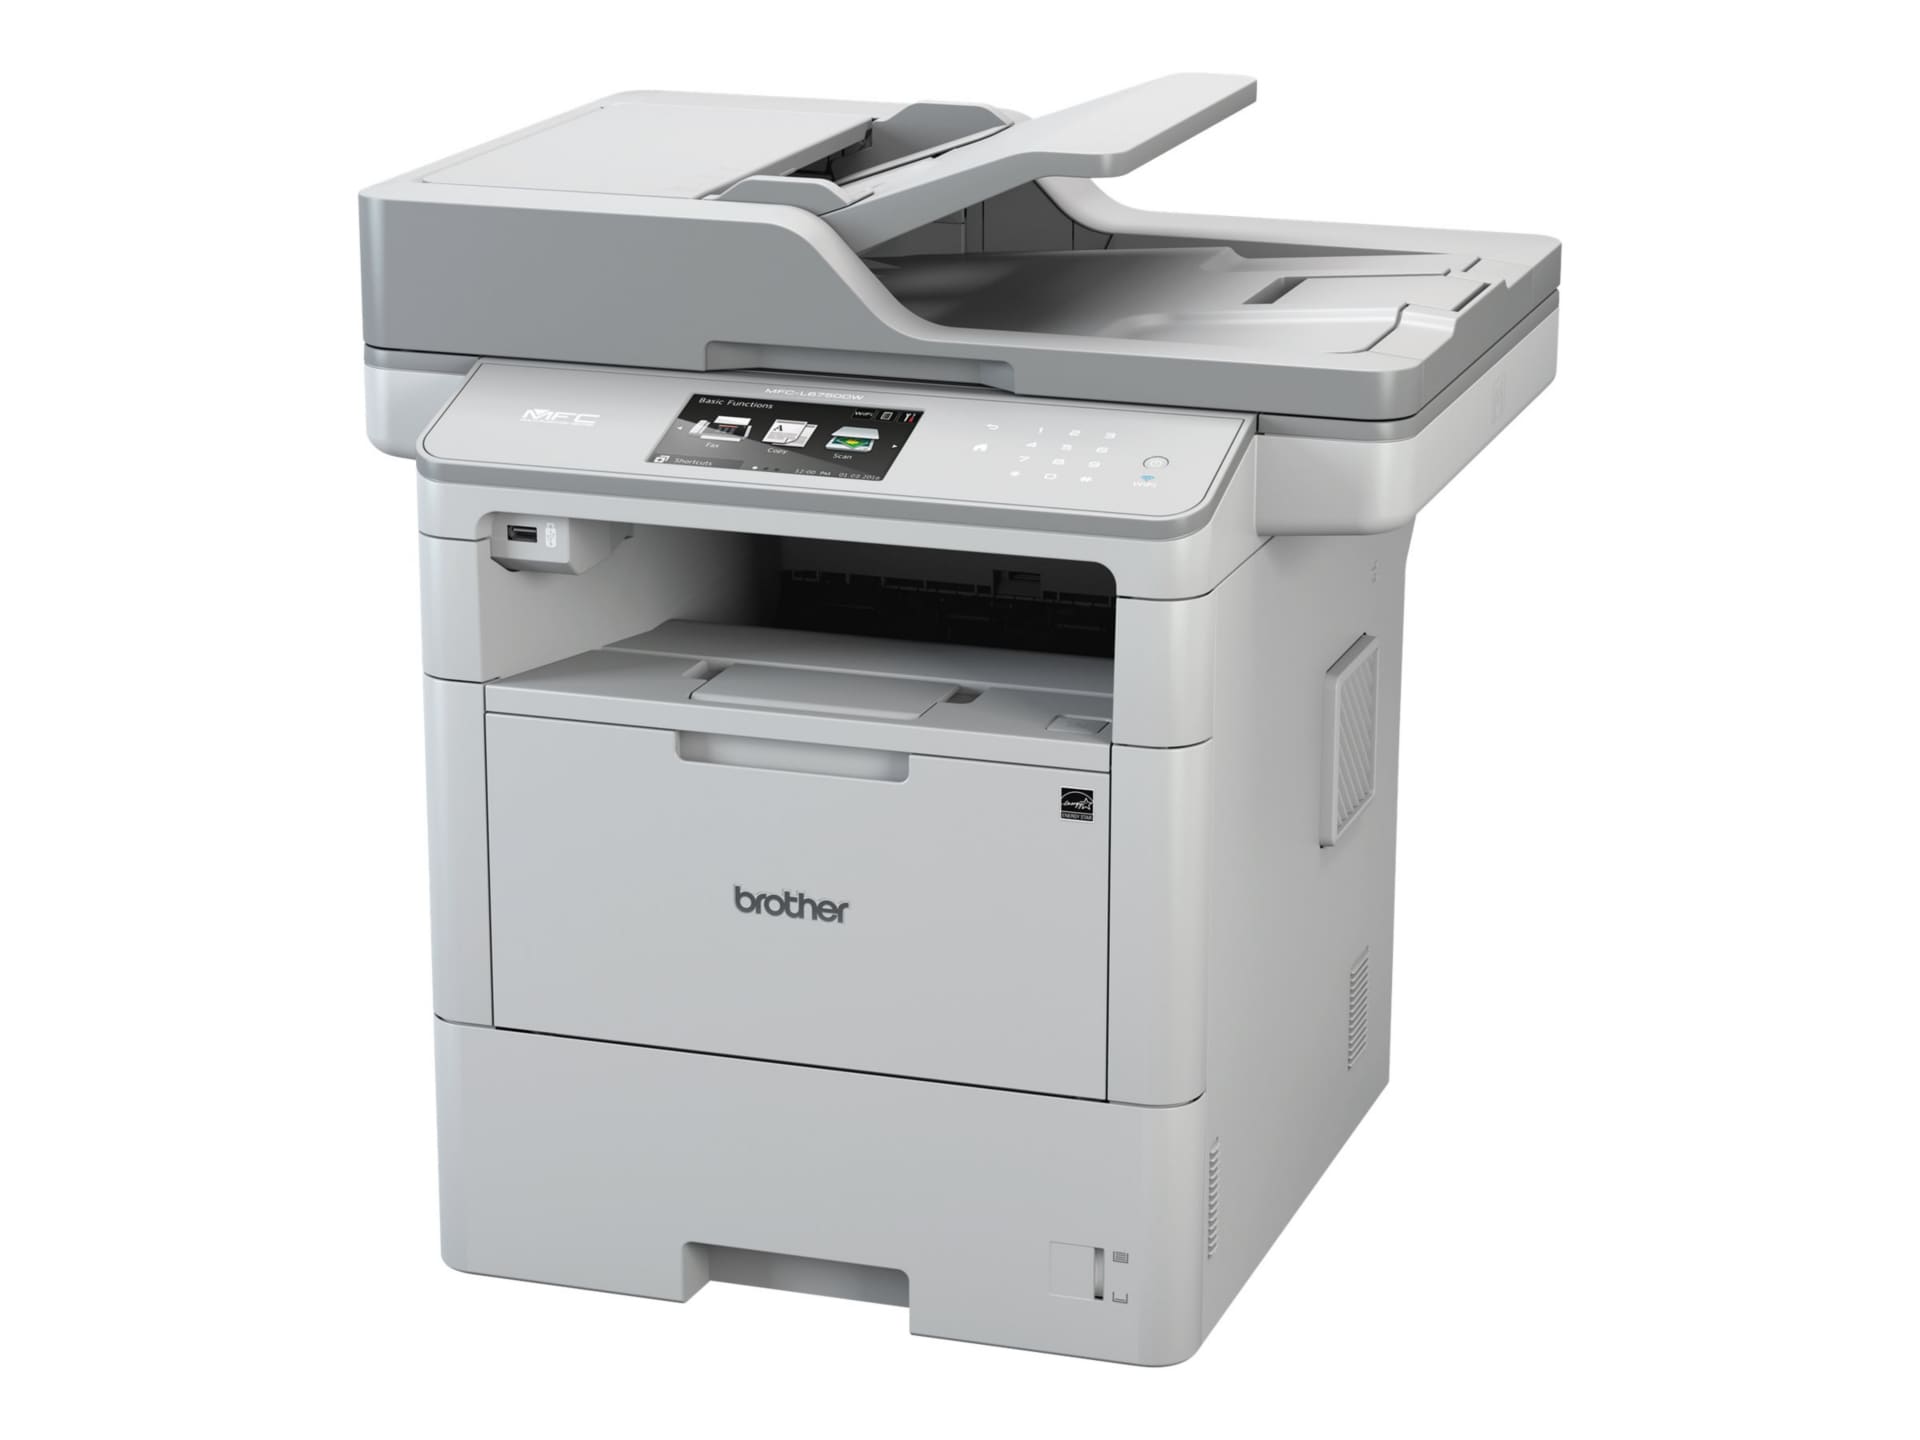 Brother MFC-L6750DW - multifunction printer - B/W - MFC-L6750DW -  All-in-One Printers 